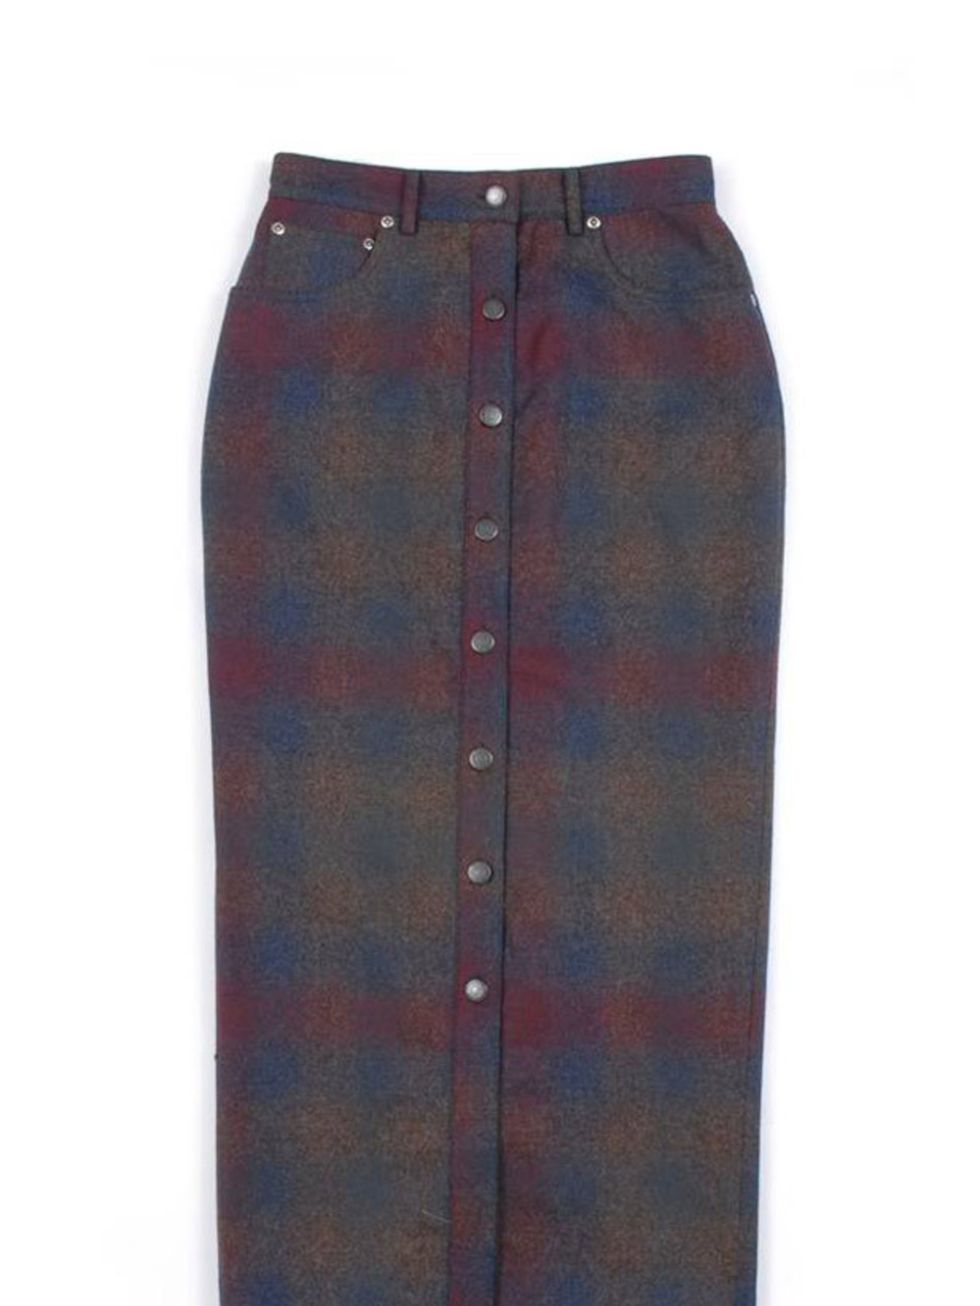 <p>Pendleton meets Opening Ceremony tartan midi skirt, £222, at <a href="http://goodhoodstore.com/?page=51&amp;id=1502&amp;type=womens">Goodhood</a></p>